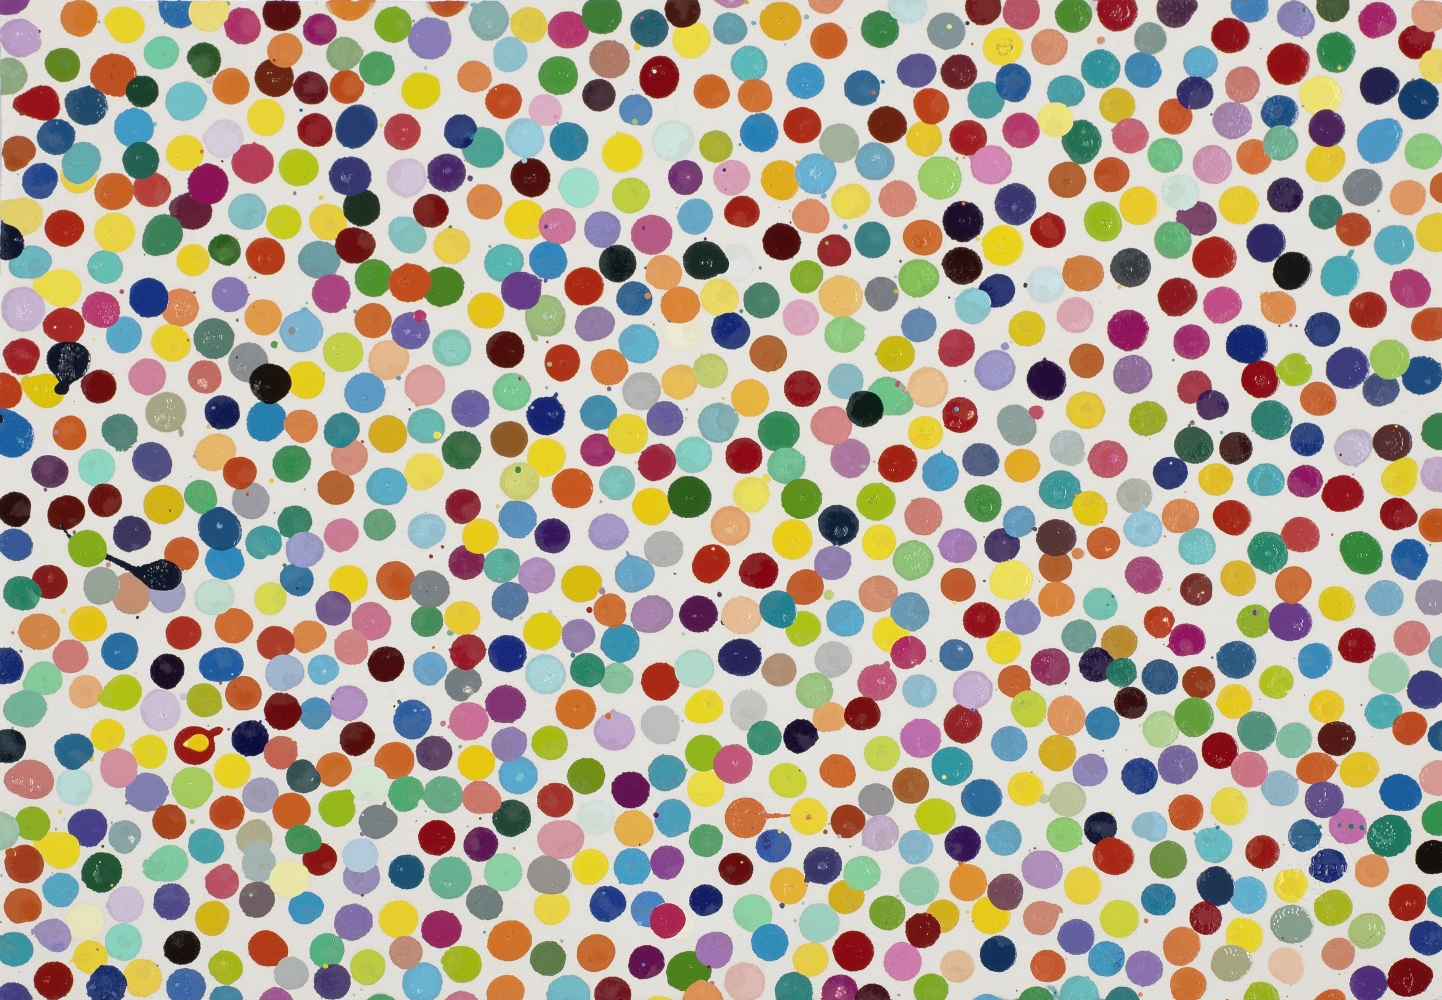 Damien Hirst (British, born 1965) We Are Nothing But Dead Old People, from 'The Currency' Unique ...